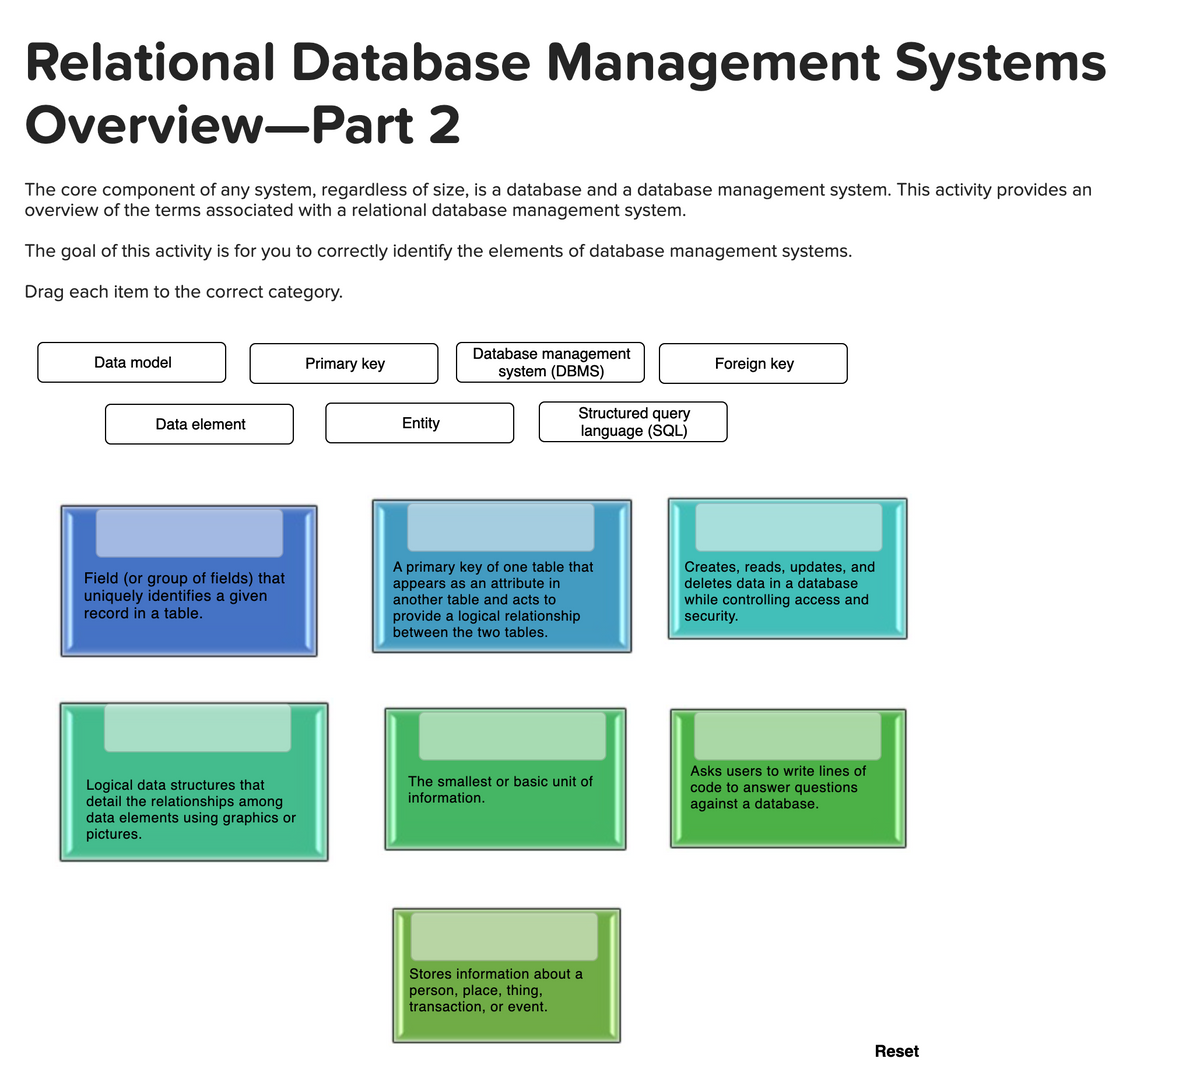 Relational Database Management Systems
Overview-Part 2
The core component of any system, regardless of size, is a database and a database management system. This activity provides an
overview of the terms associated with a relational database management system.
The goal of this activity is for you to correctly identify the elements of database management systems.
Drag each item to the correct category.
Database management
system (DBMS)
Data model
Primary key
Foreign key
Structured query
Data element
Entity
language (SQL)
Field (or group of fields) that
uniquely identifies a given
record in a table.
A primary key of one table that
appears as an attribute in
another table and acts to
Creates, reads, updates, and
deletes data in a database
while controlling access and
security.
provide a logical relationship
between the two tables.
Asks users to write lines of
code to answer questions
against a database.
The smallest or basic unit of
Logical data structures that
detail the relationships among
data elements using graphics or
pictures.
information.
Stores information about a
person, place, thing,
transaction, or event.
Reset
